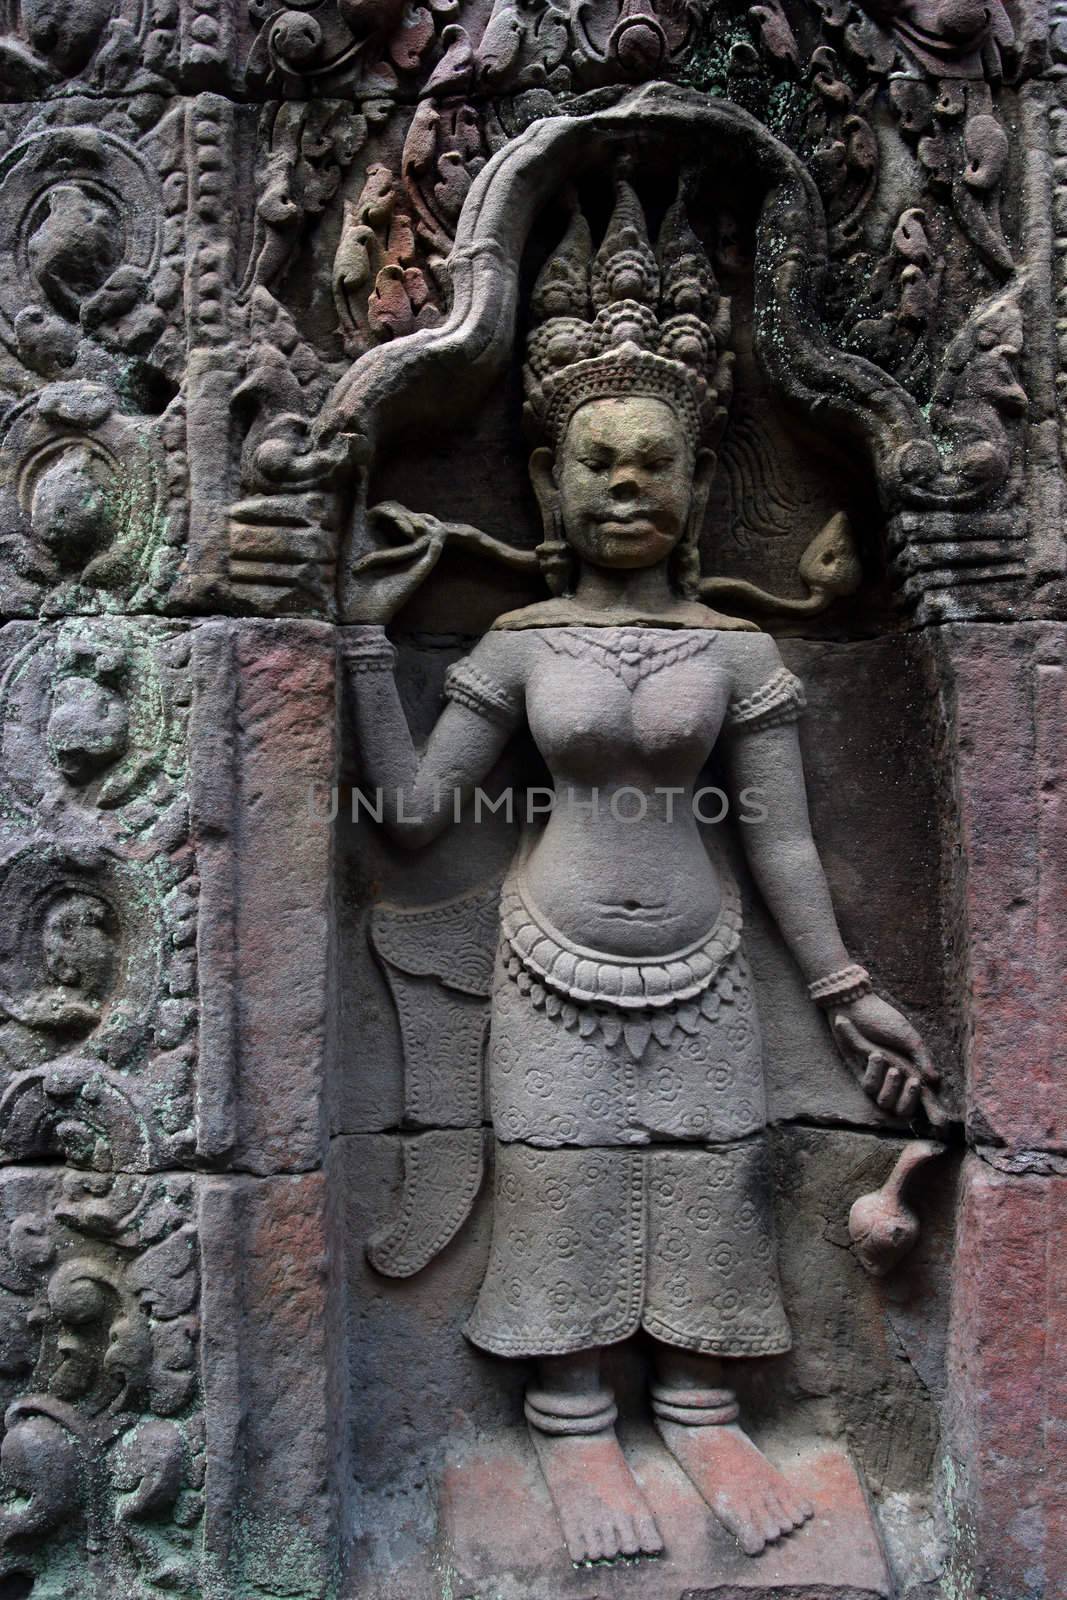 A wall carving from the Angkor temples in Cambodia.
